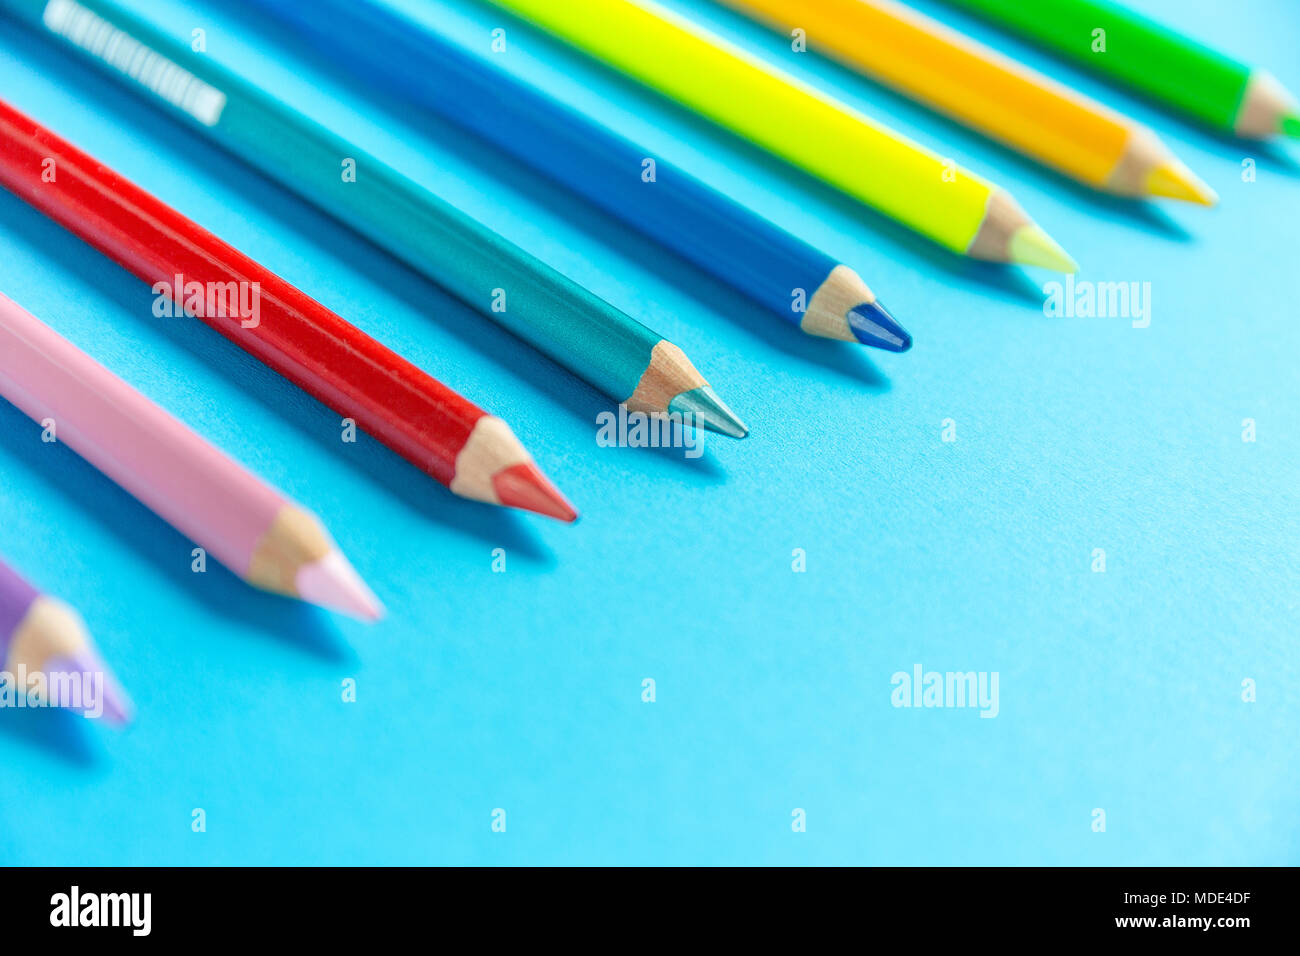 Row of rainbow pencils Stock Photo by ©scanrail 4186414